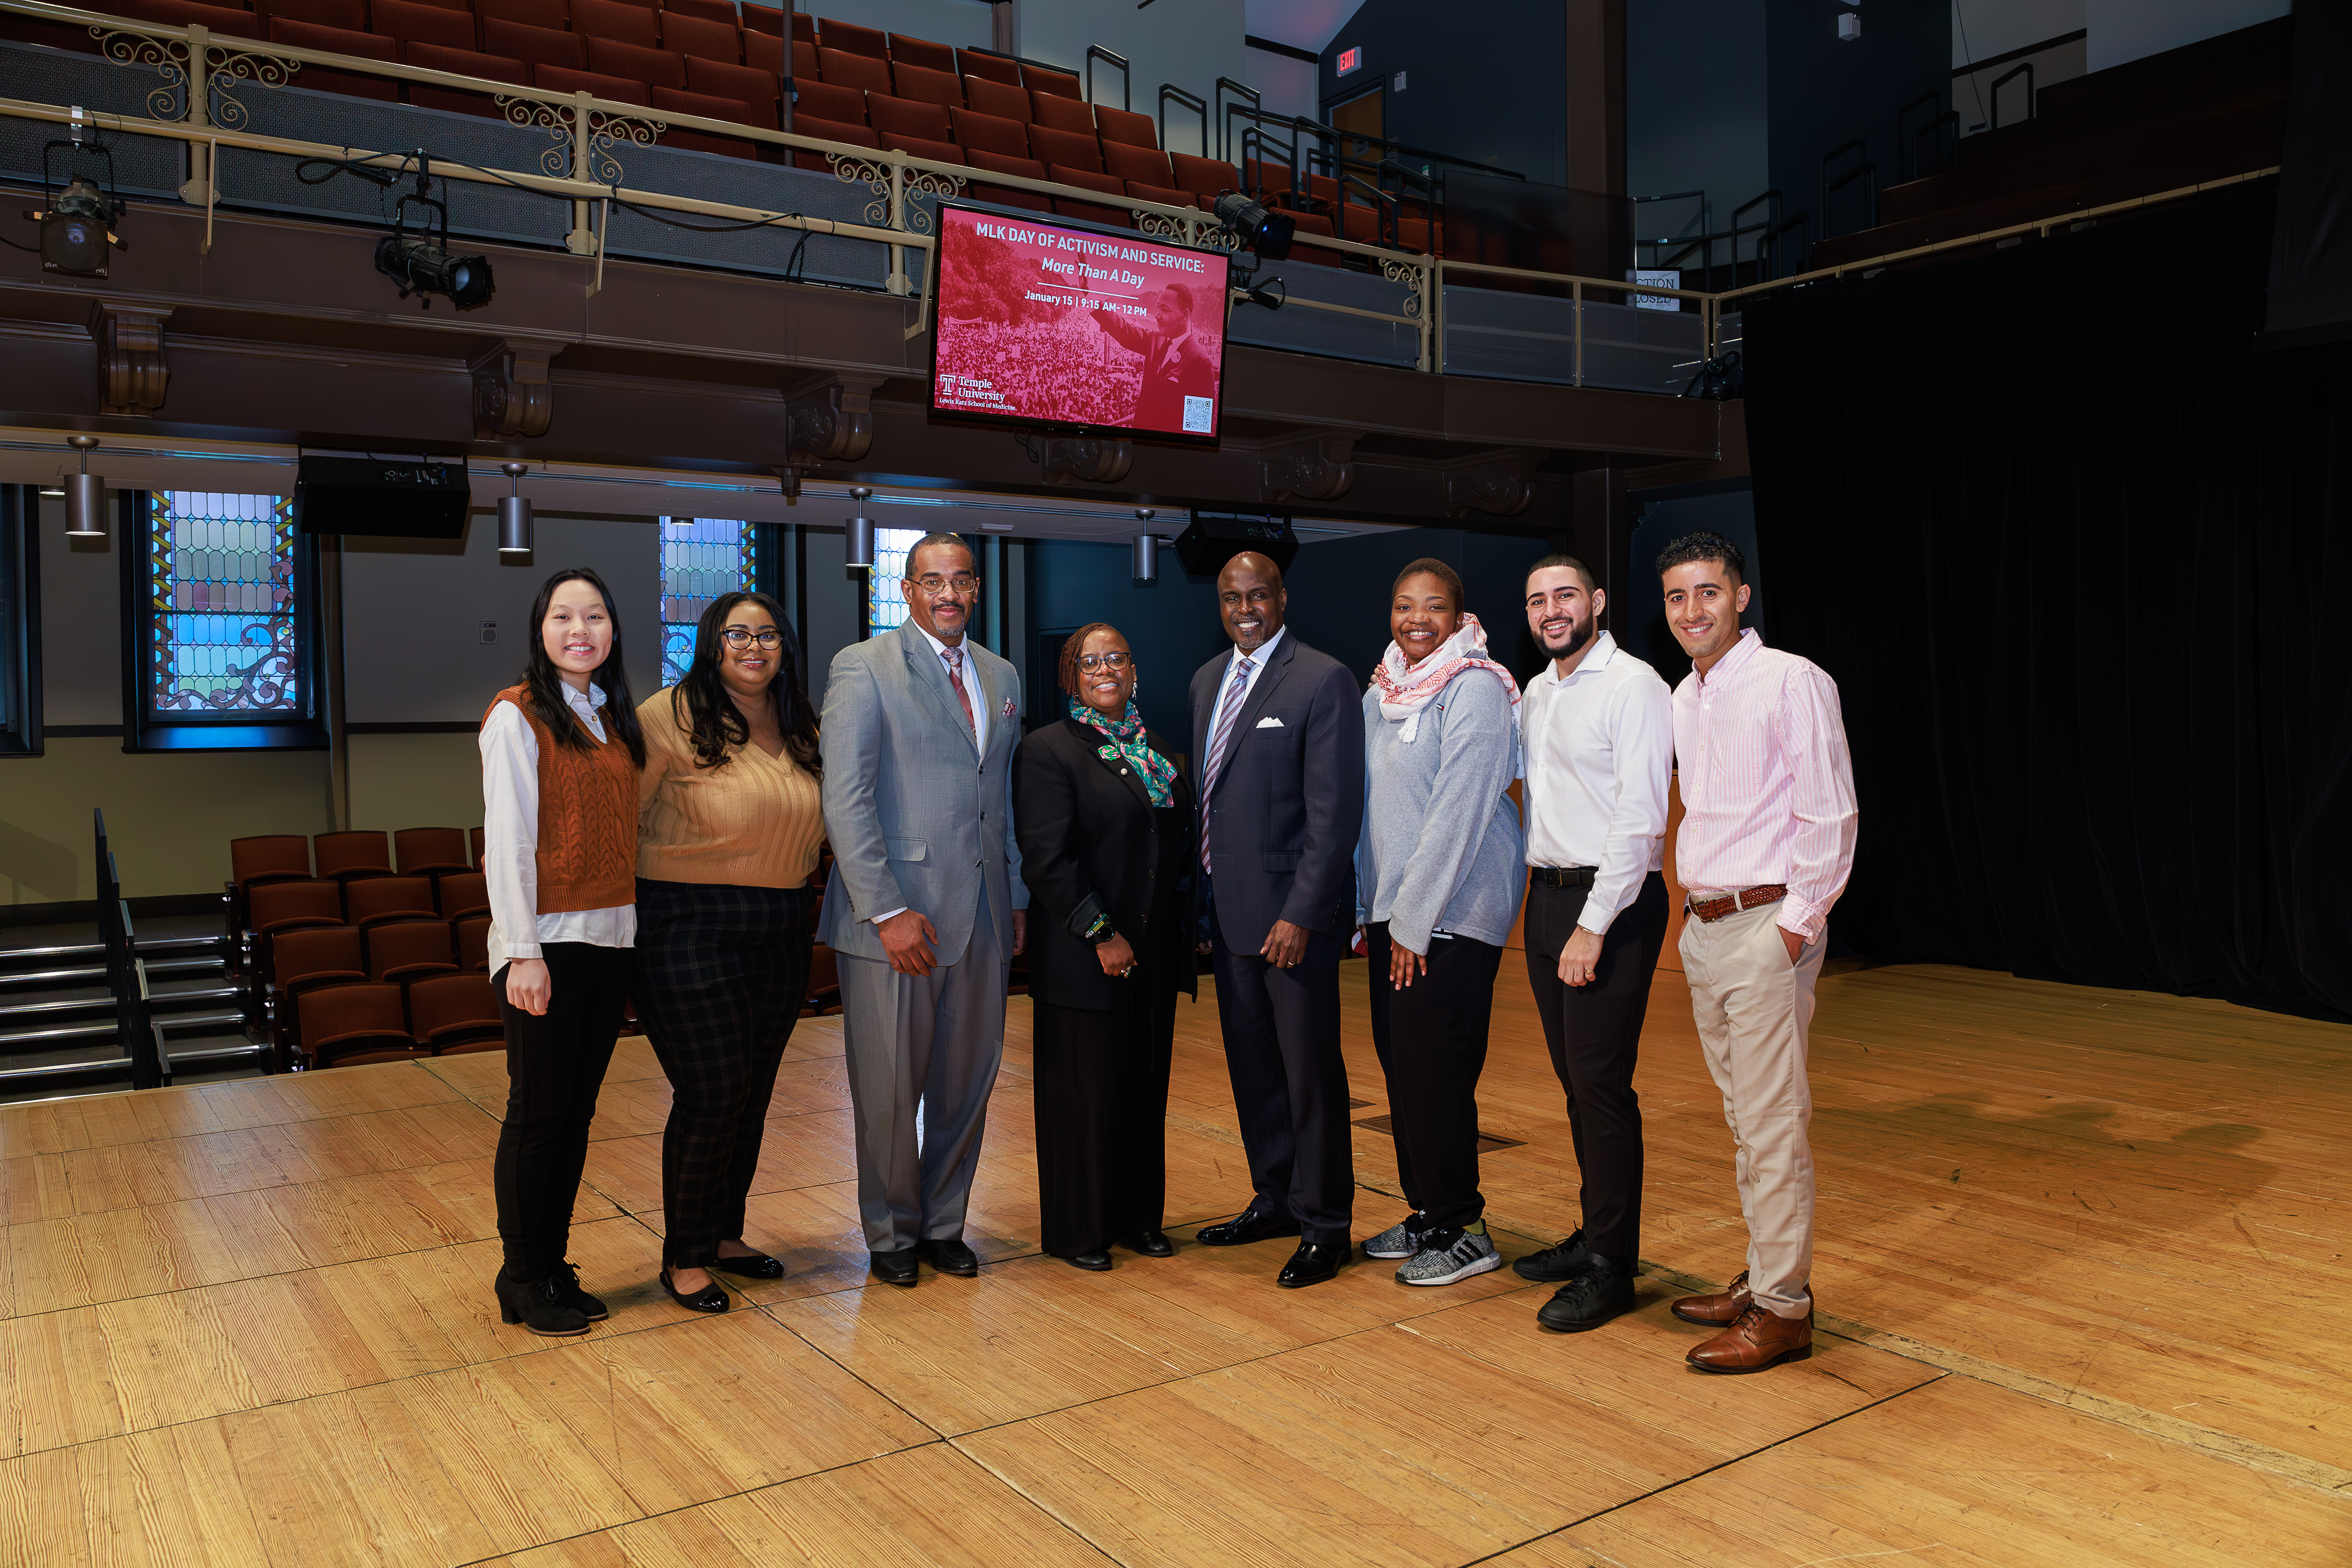 A team of planners for the MLK Day event